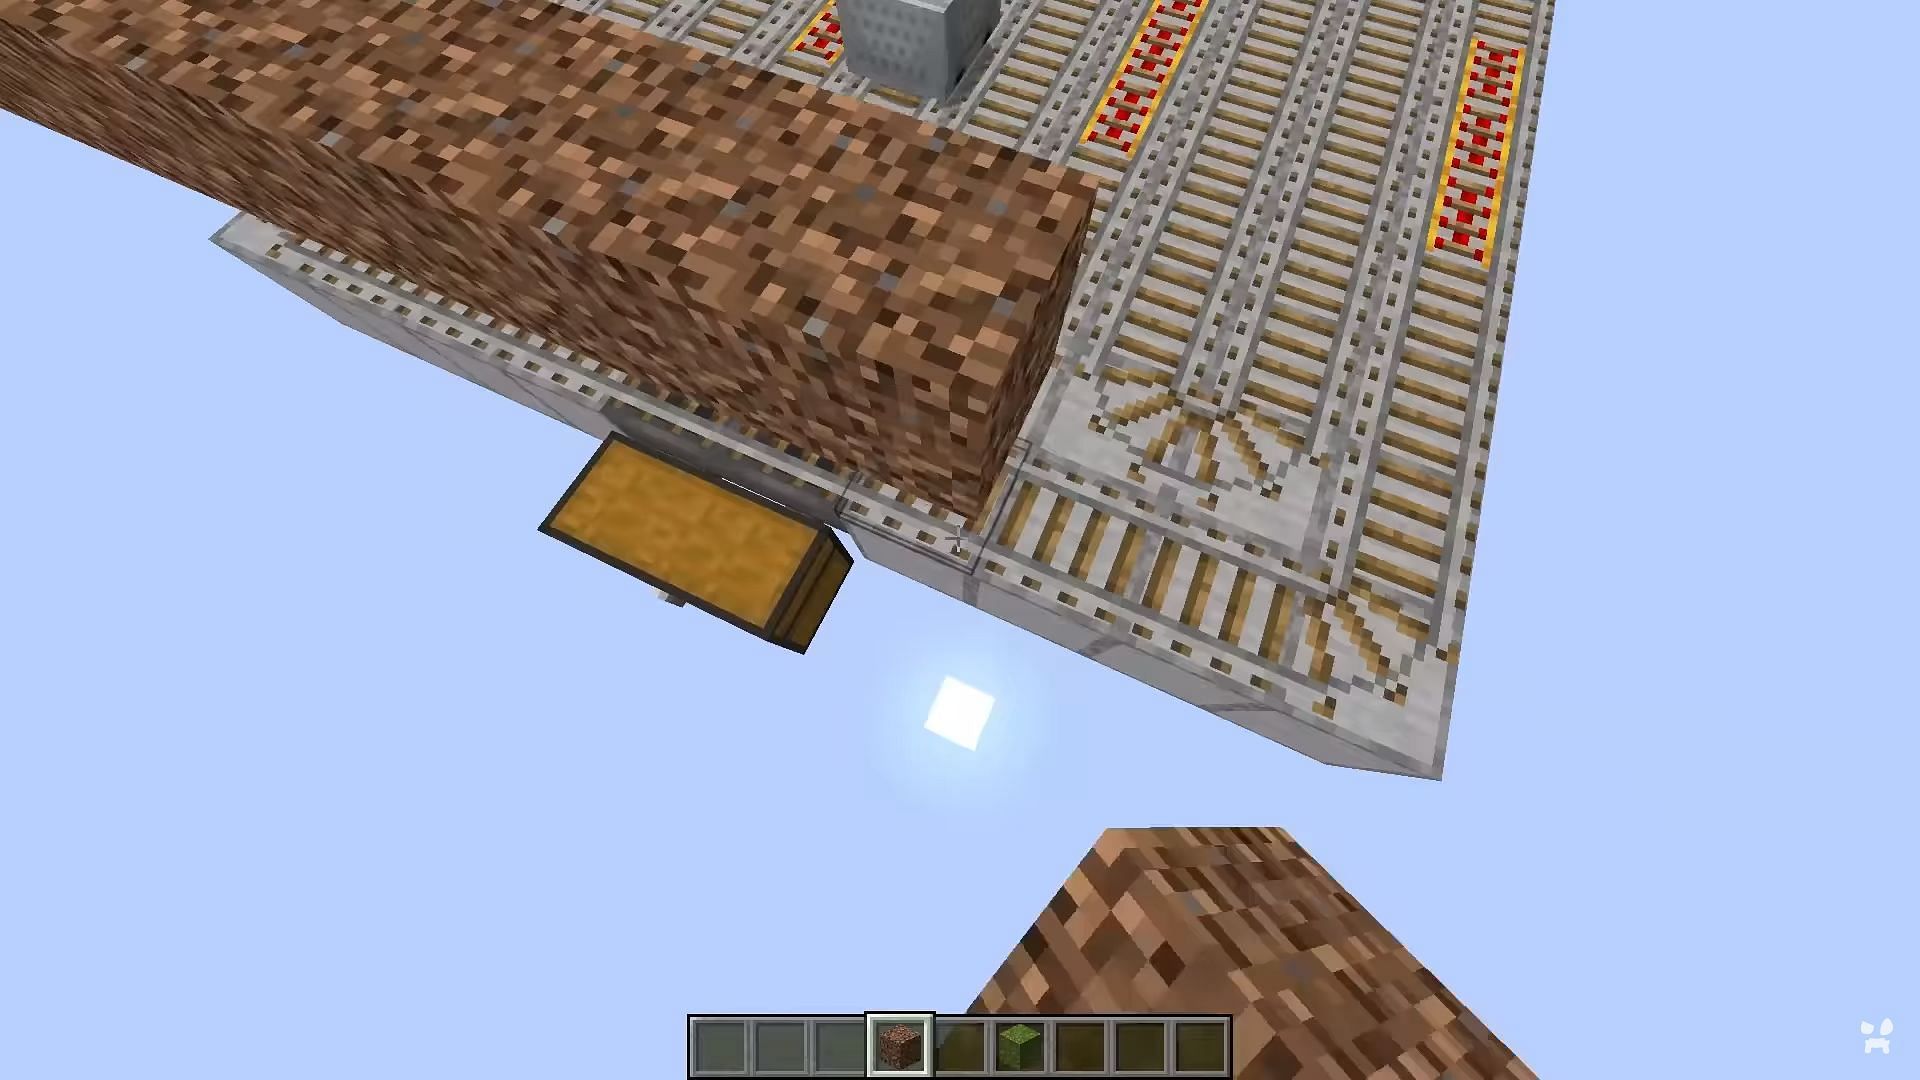 Create a platform for Sniffers to roam around and breed right above the collection area in Minecraft (Image via YouTube/wattles)